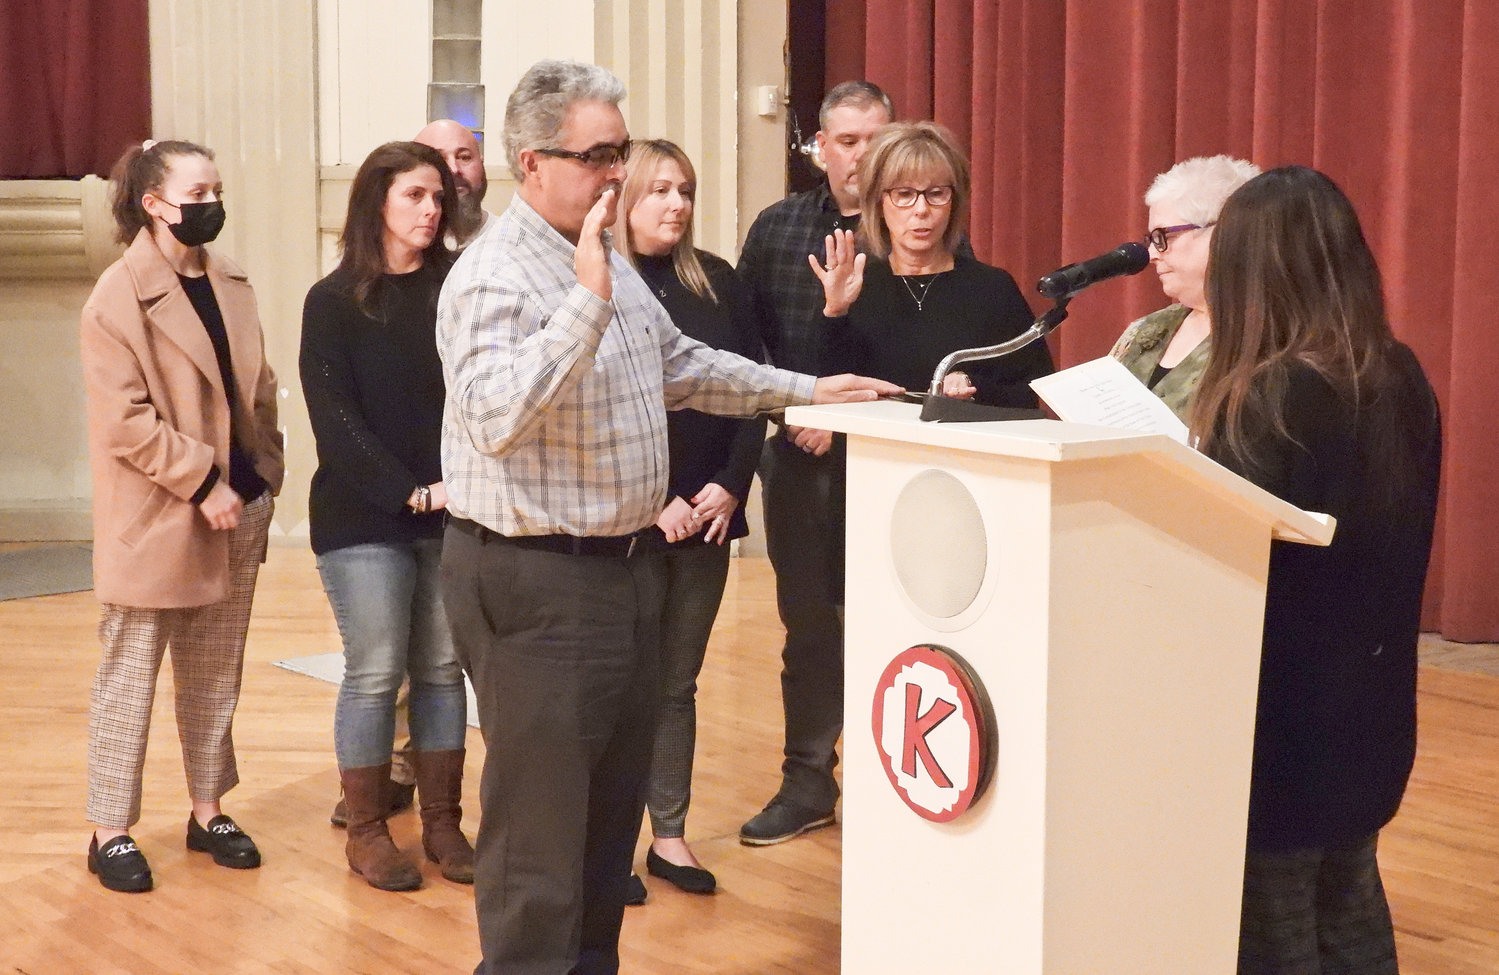 WARDS 4, 5, 6 — Madison County Supervisor Joseph Magliocca, left, takes his oath of office alongside the family of Joseph Ostrander, who was sworn into office posthumously.